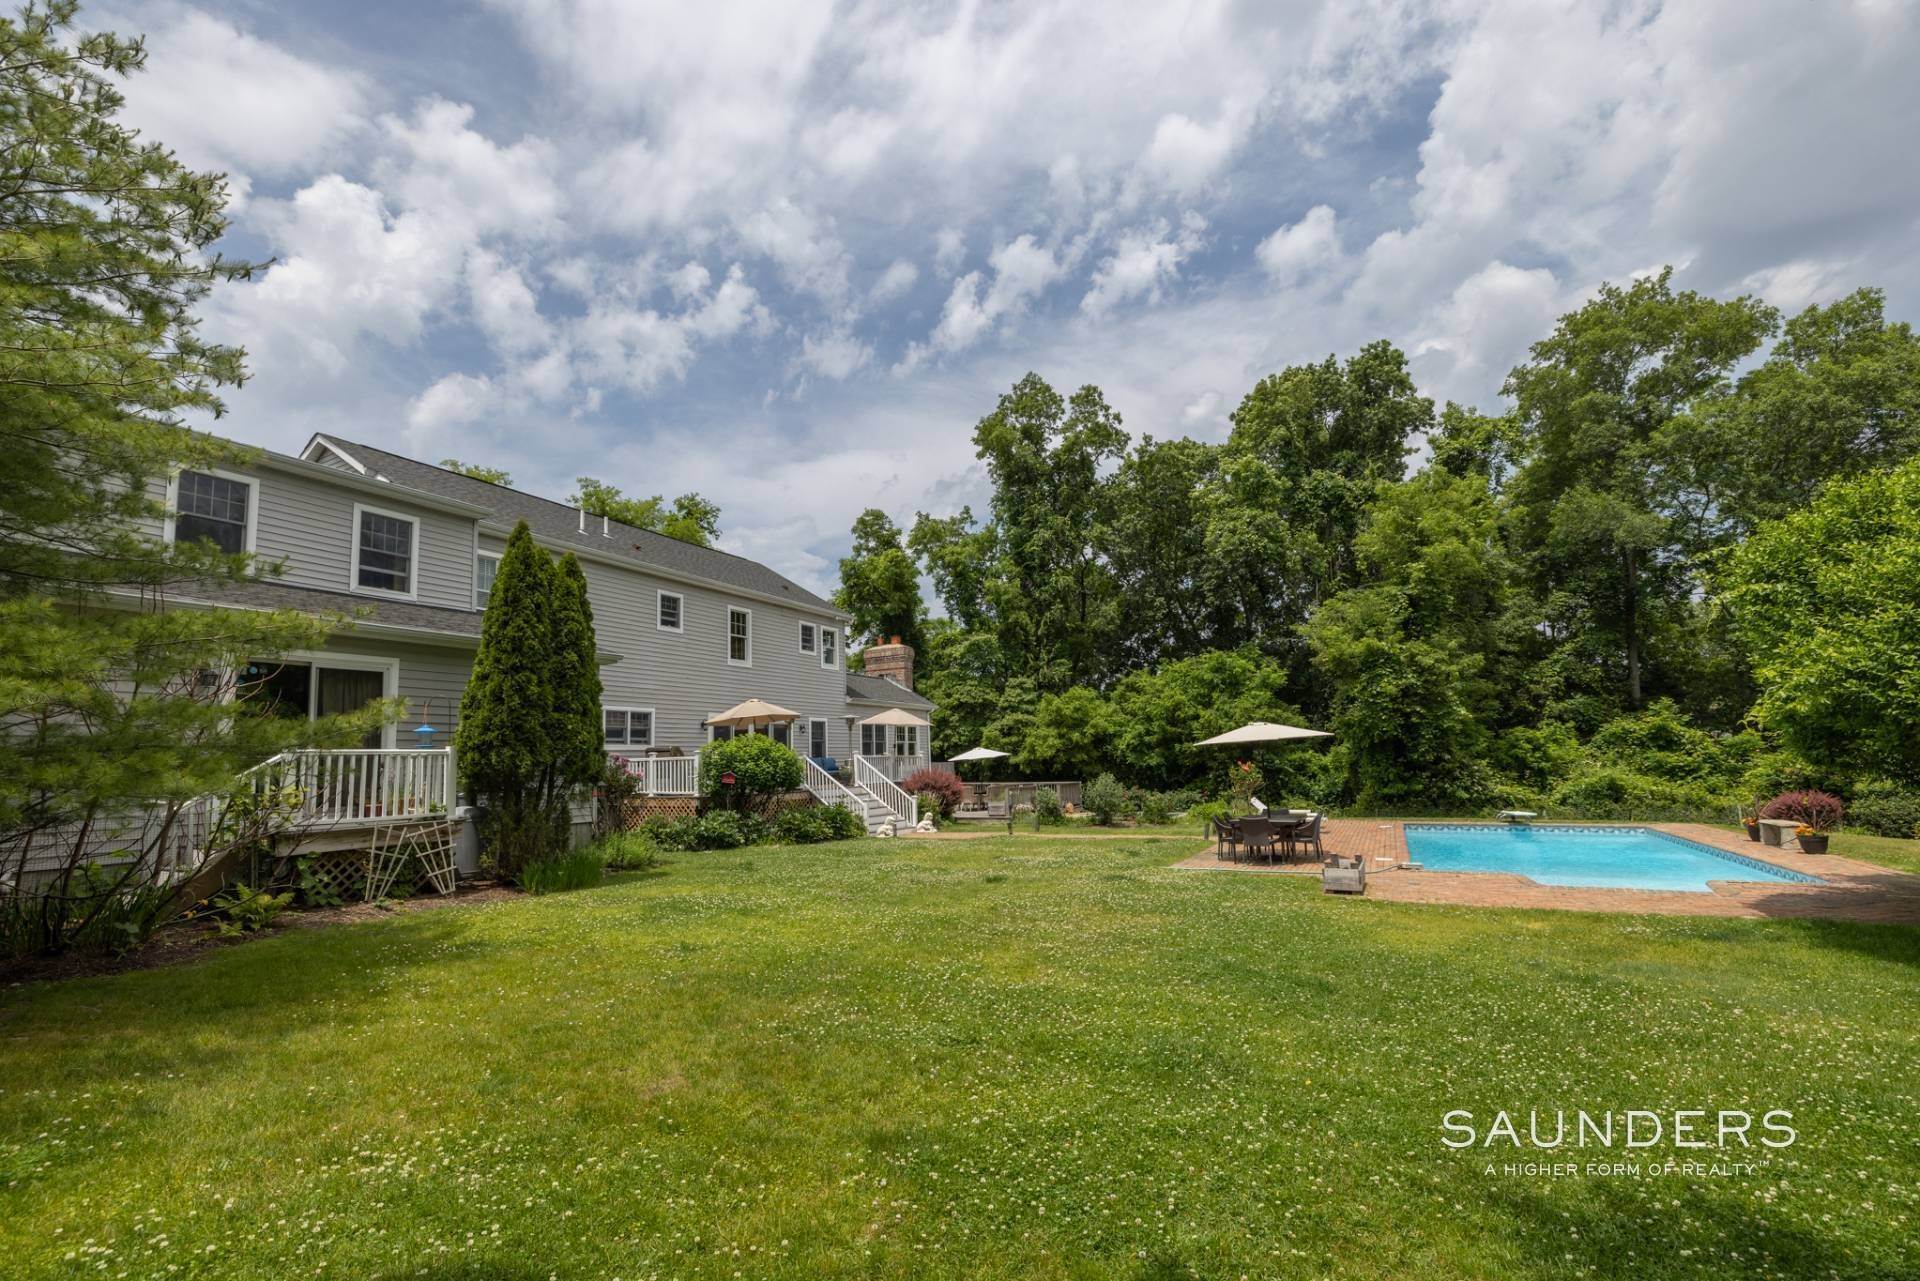 19. Single Family Homes for Sale at Spacious Colonial On 1.6 Acres With Accessory Apartment 2 Do's Way (320 Noyack Road), Southampton, NY 11968